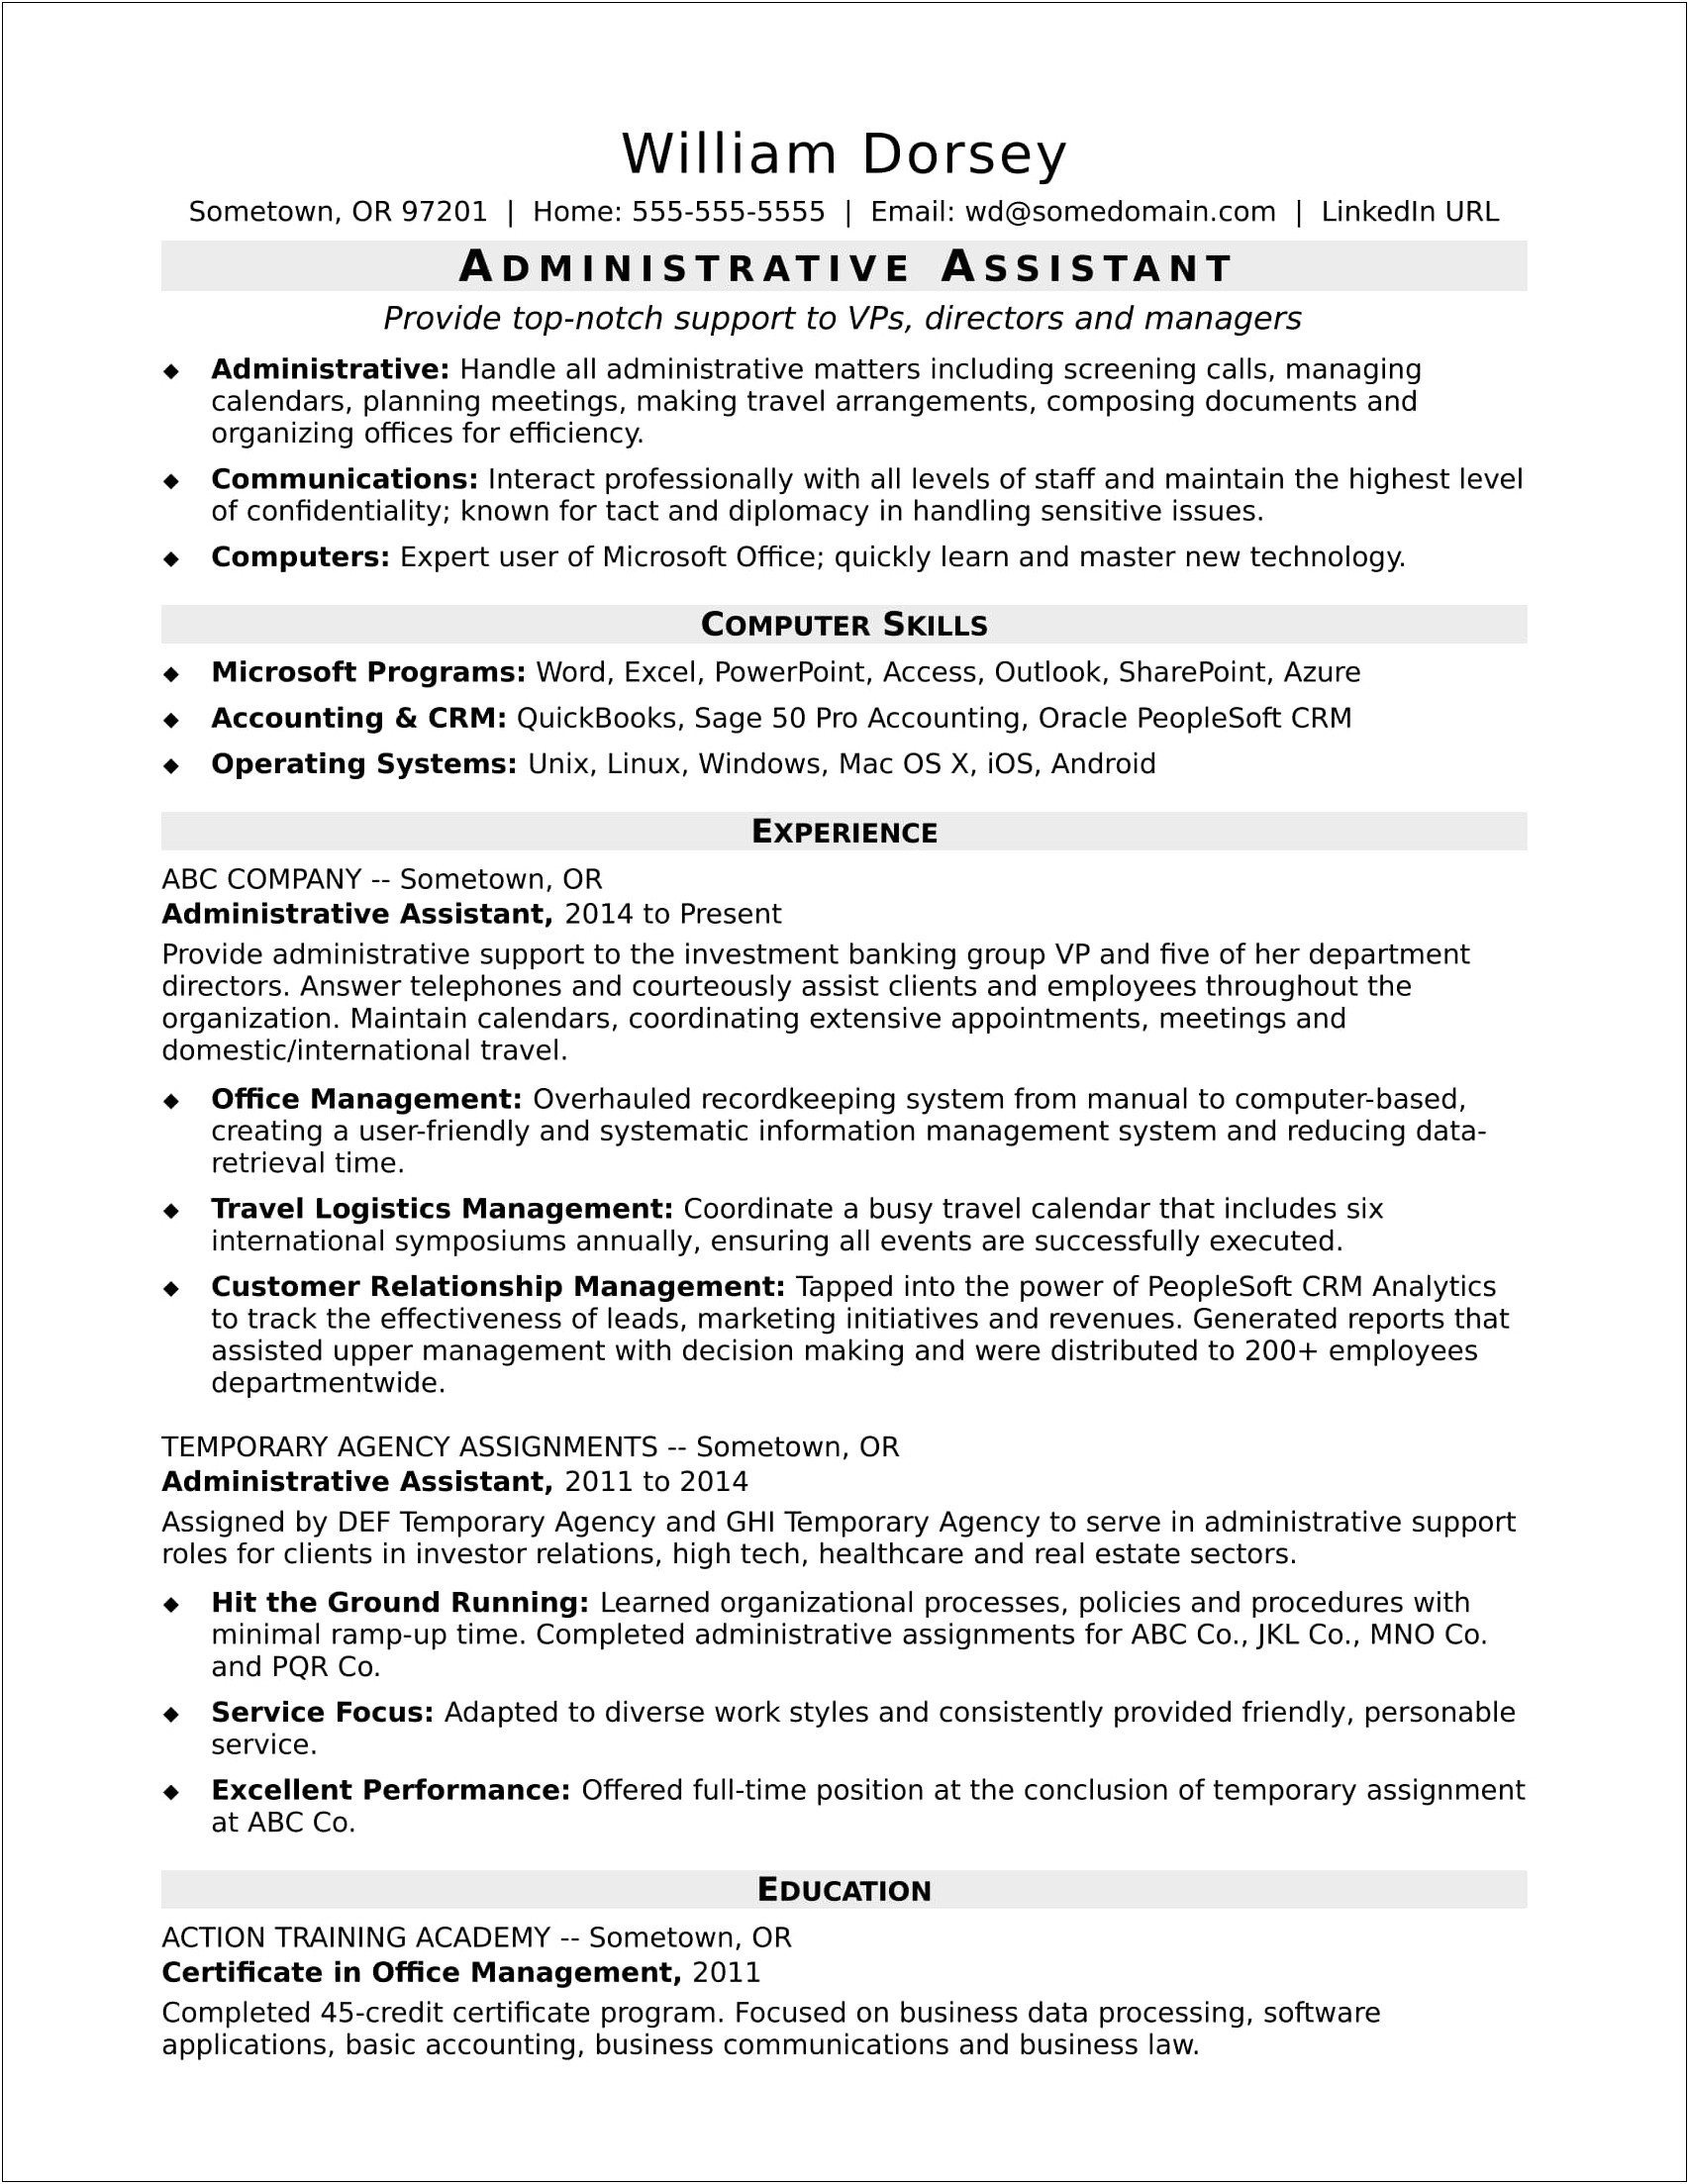 Administrative Assistant Resume Template Microsoft Word